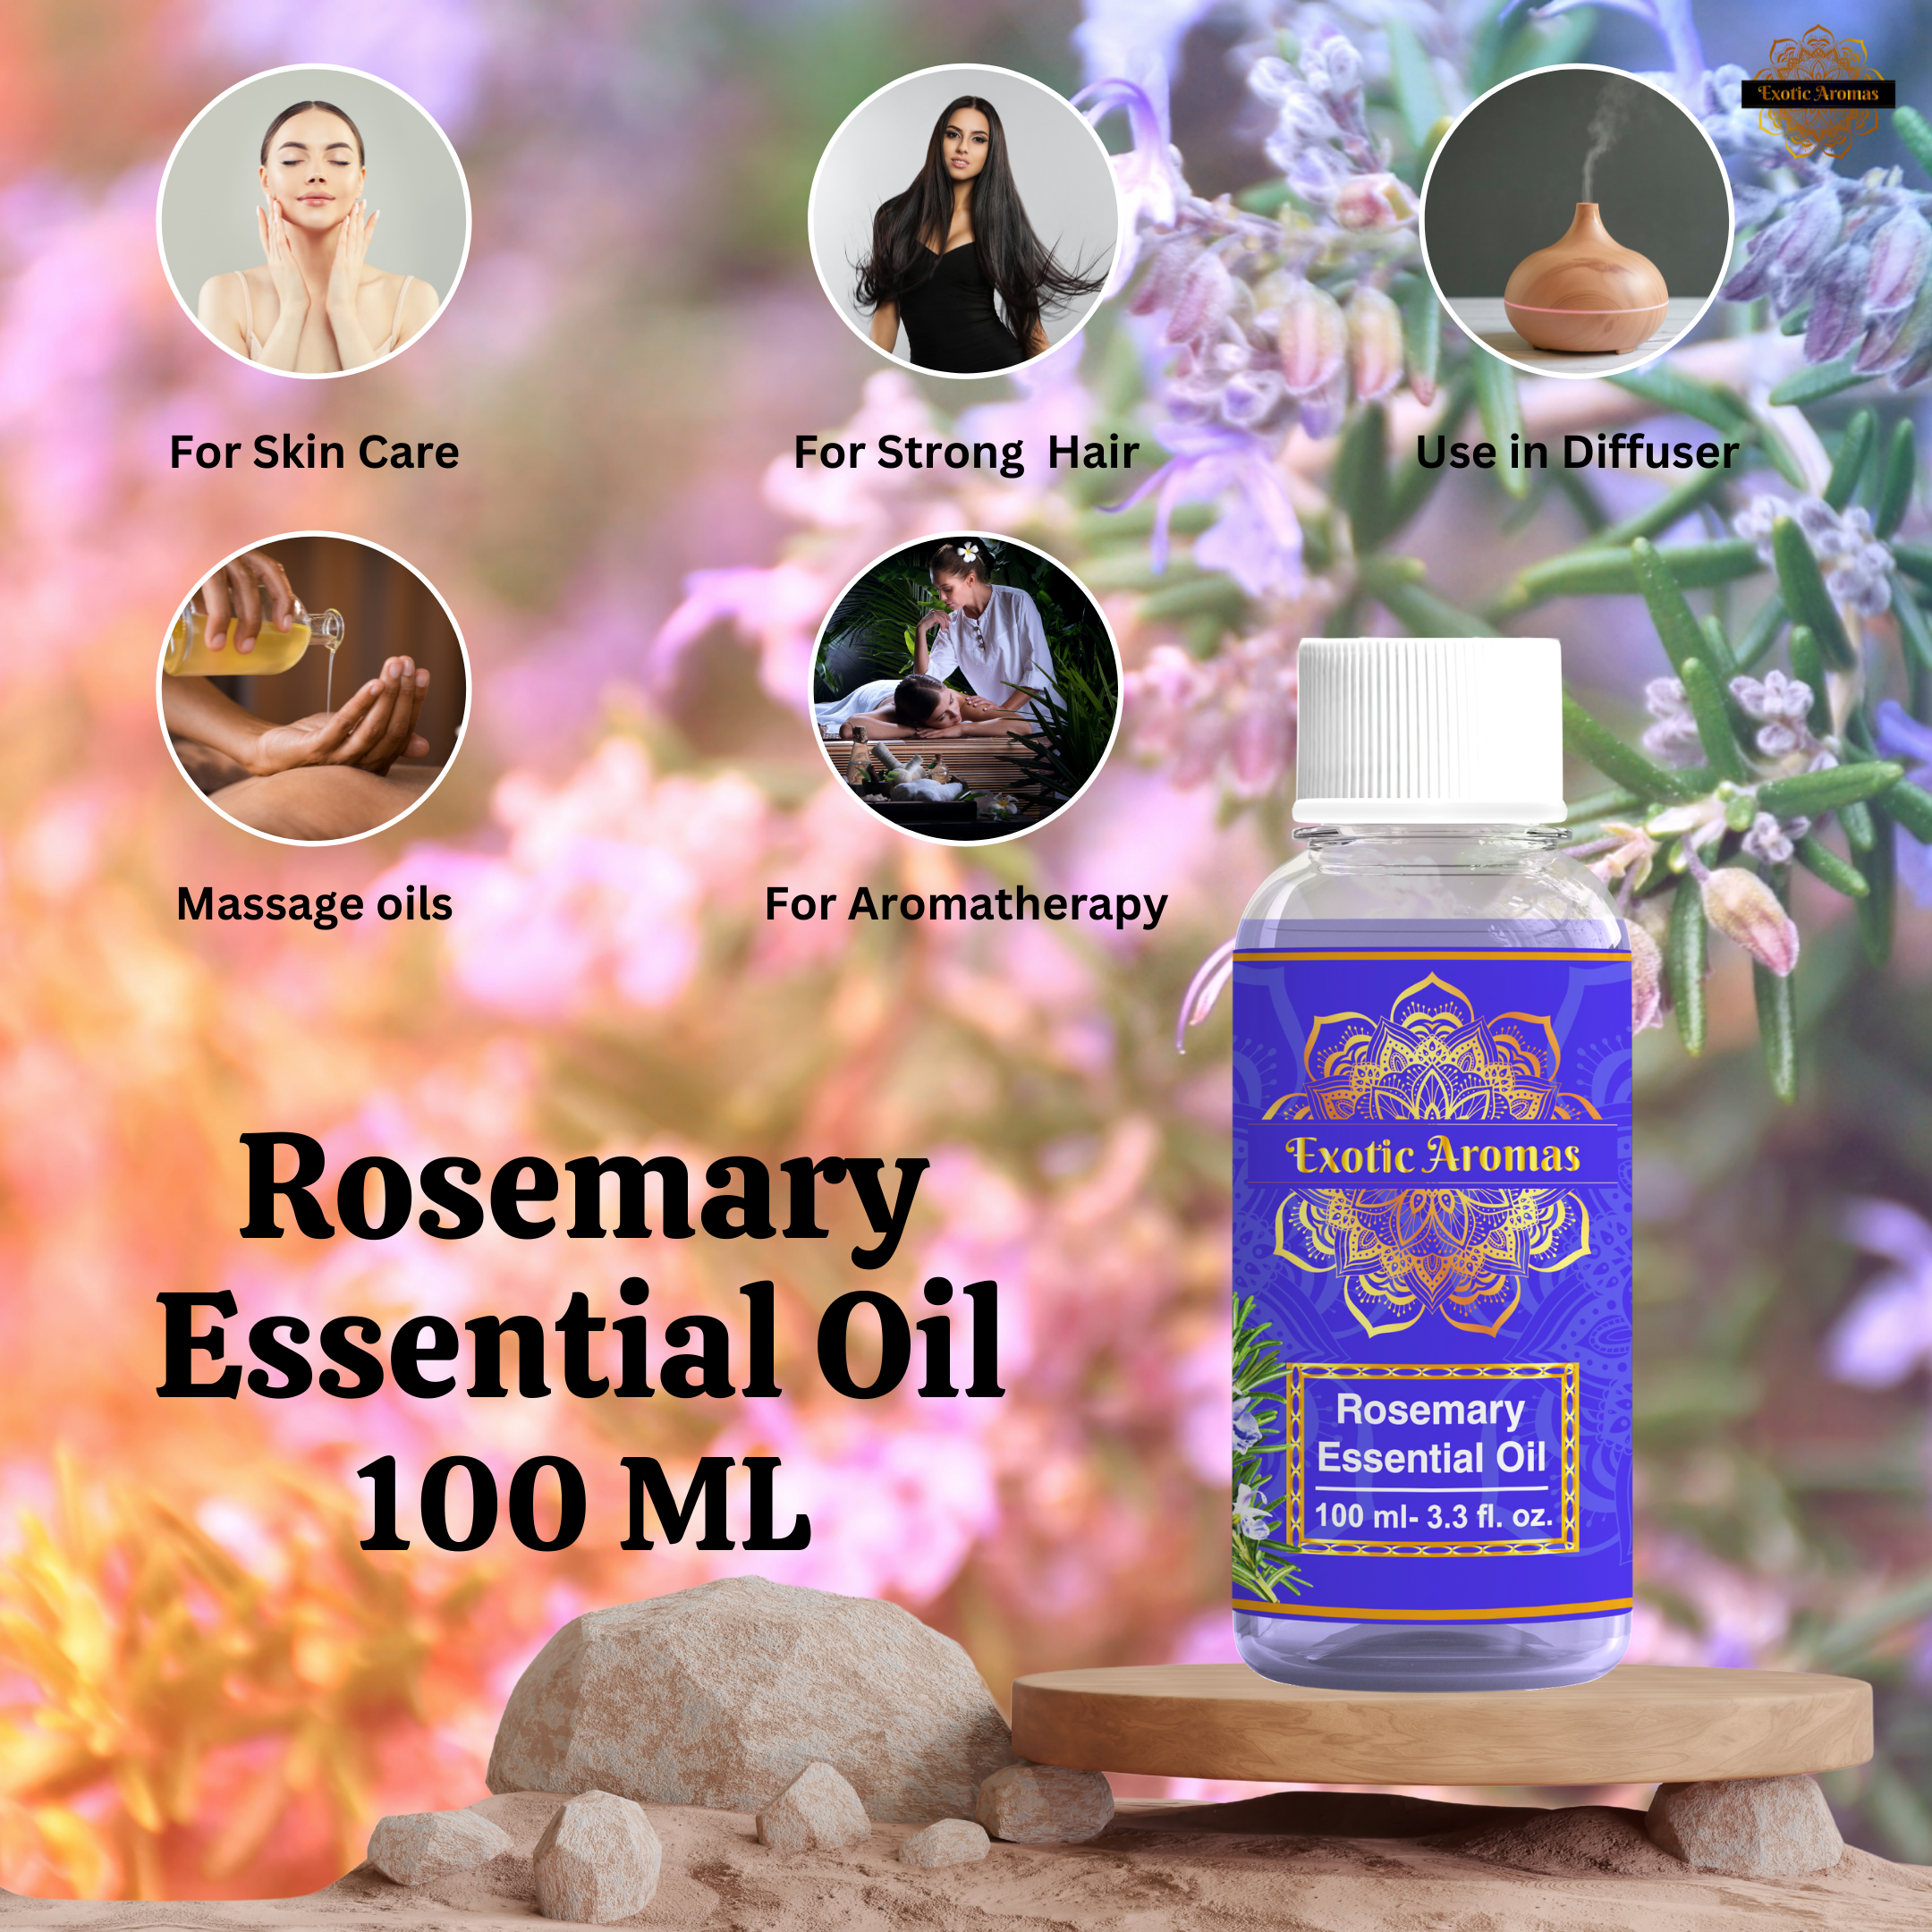 The Benefits of Rosemary Oil For Hair A Comprehensive Guide   HairKnowHowCom Professional Hair Testing Services  Hair Clinics  Trichologists  Private Clients